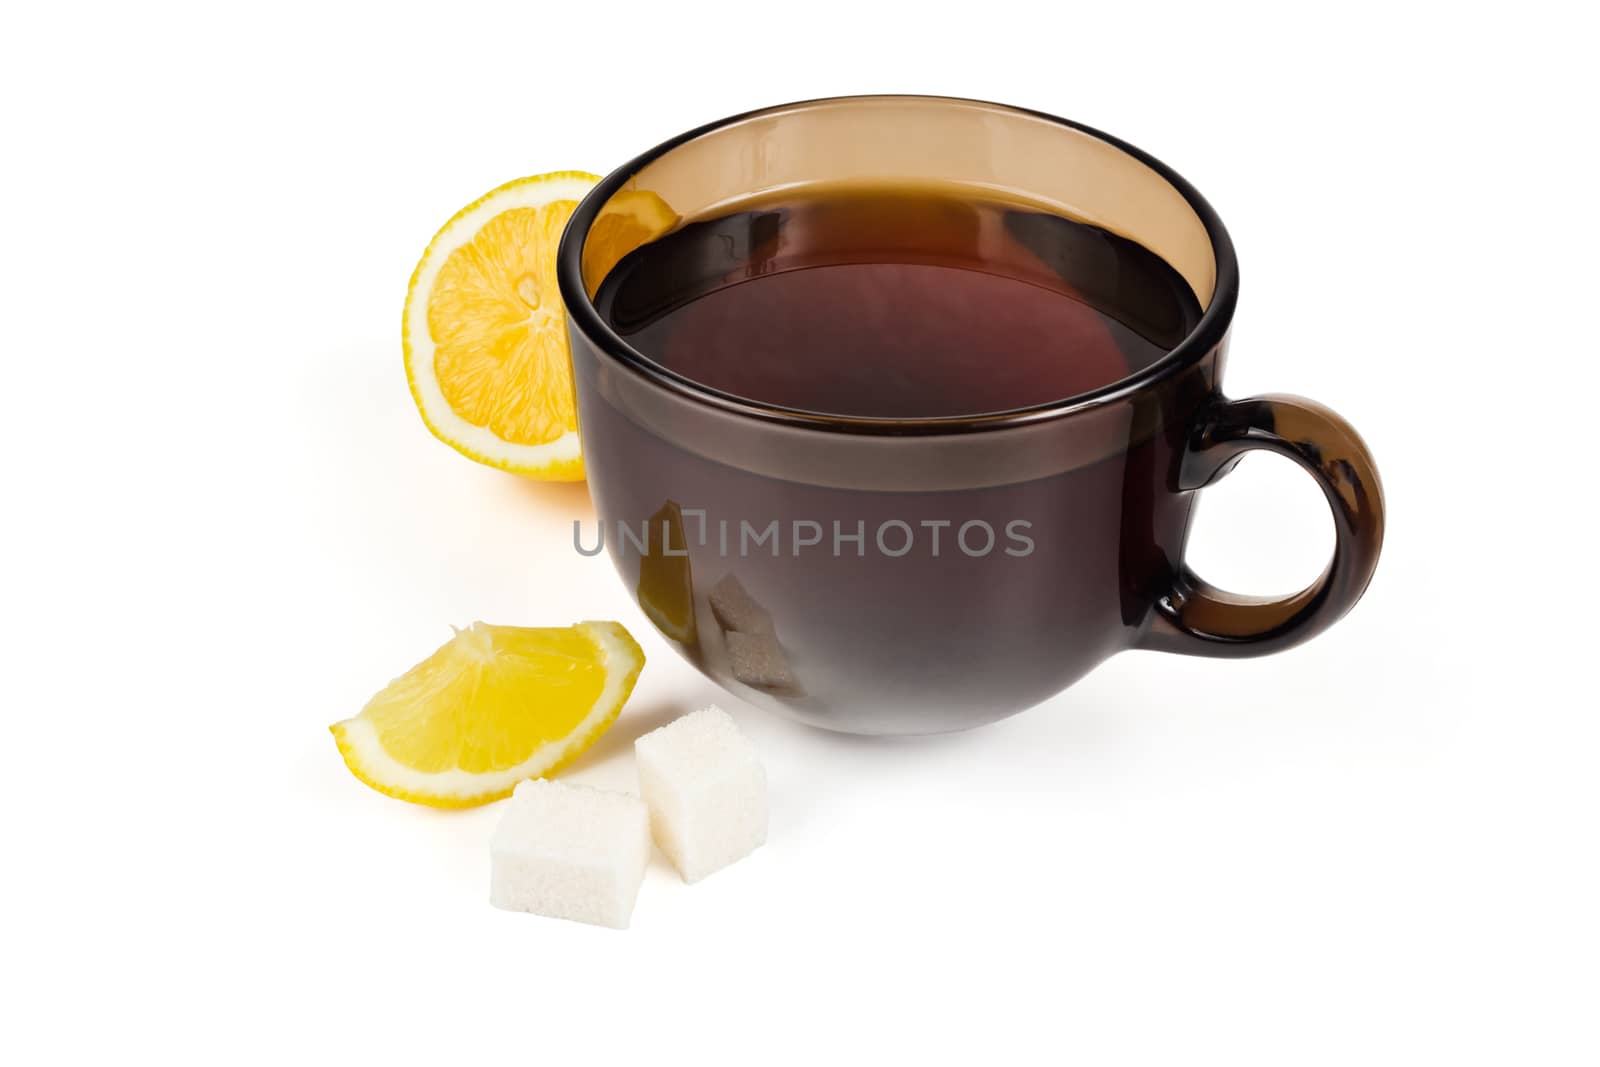 Cup of tea lemon slice and sugar on a white background